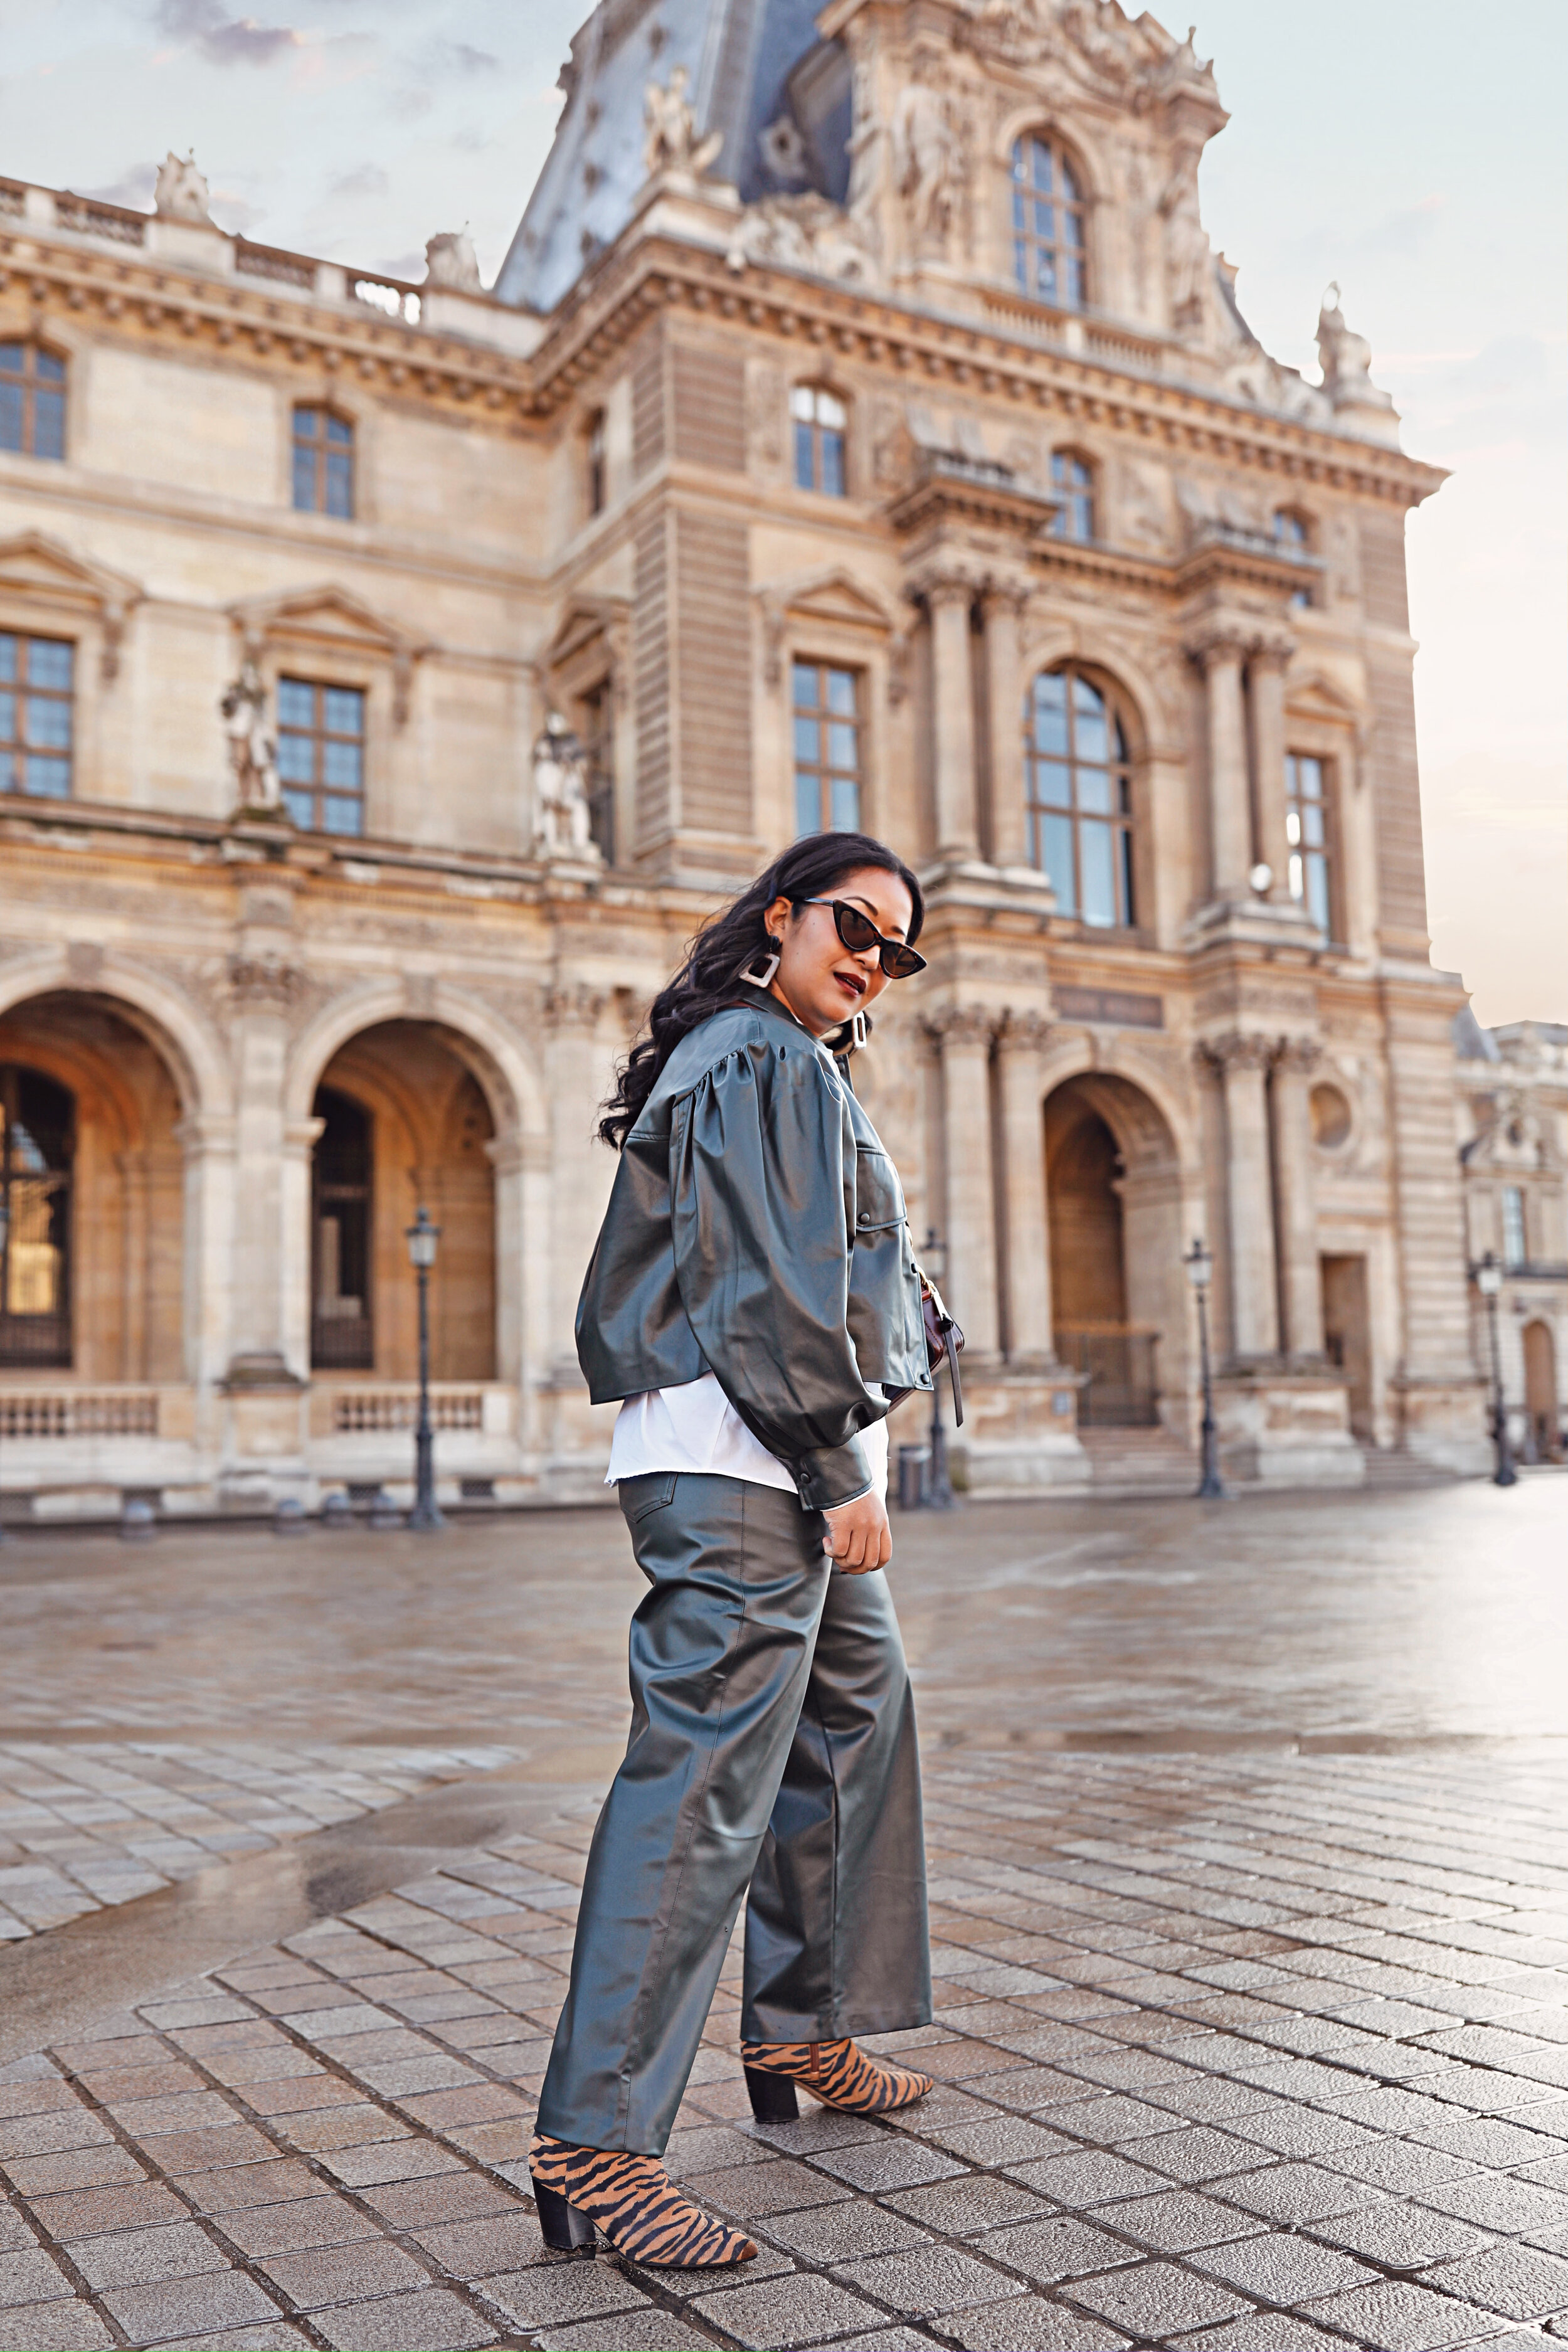 Louvre Paris Instagramable Photo Location – Green Leather co-ord set Marc Jacobs Bag